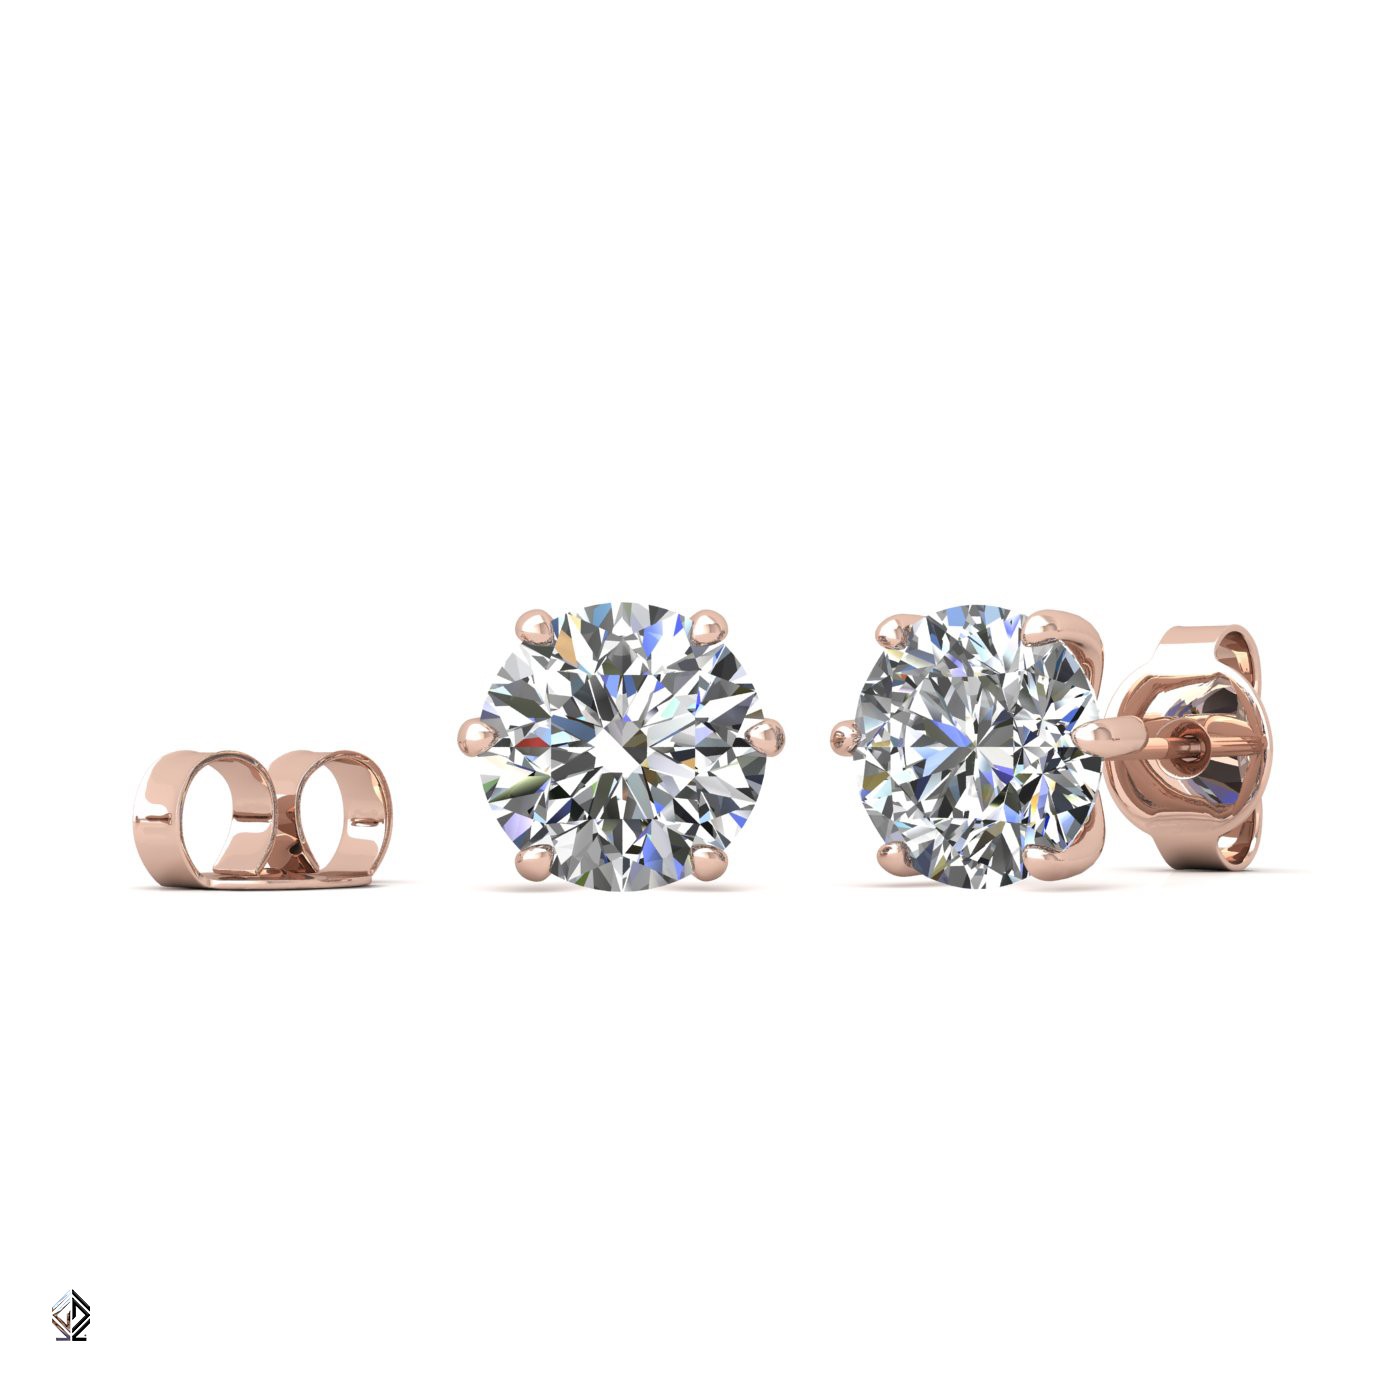 18k rose gold 2.5 ct each (5,0 tcw) 6 prongs round shape diamond earrings Photos & images